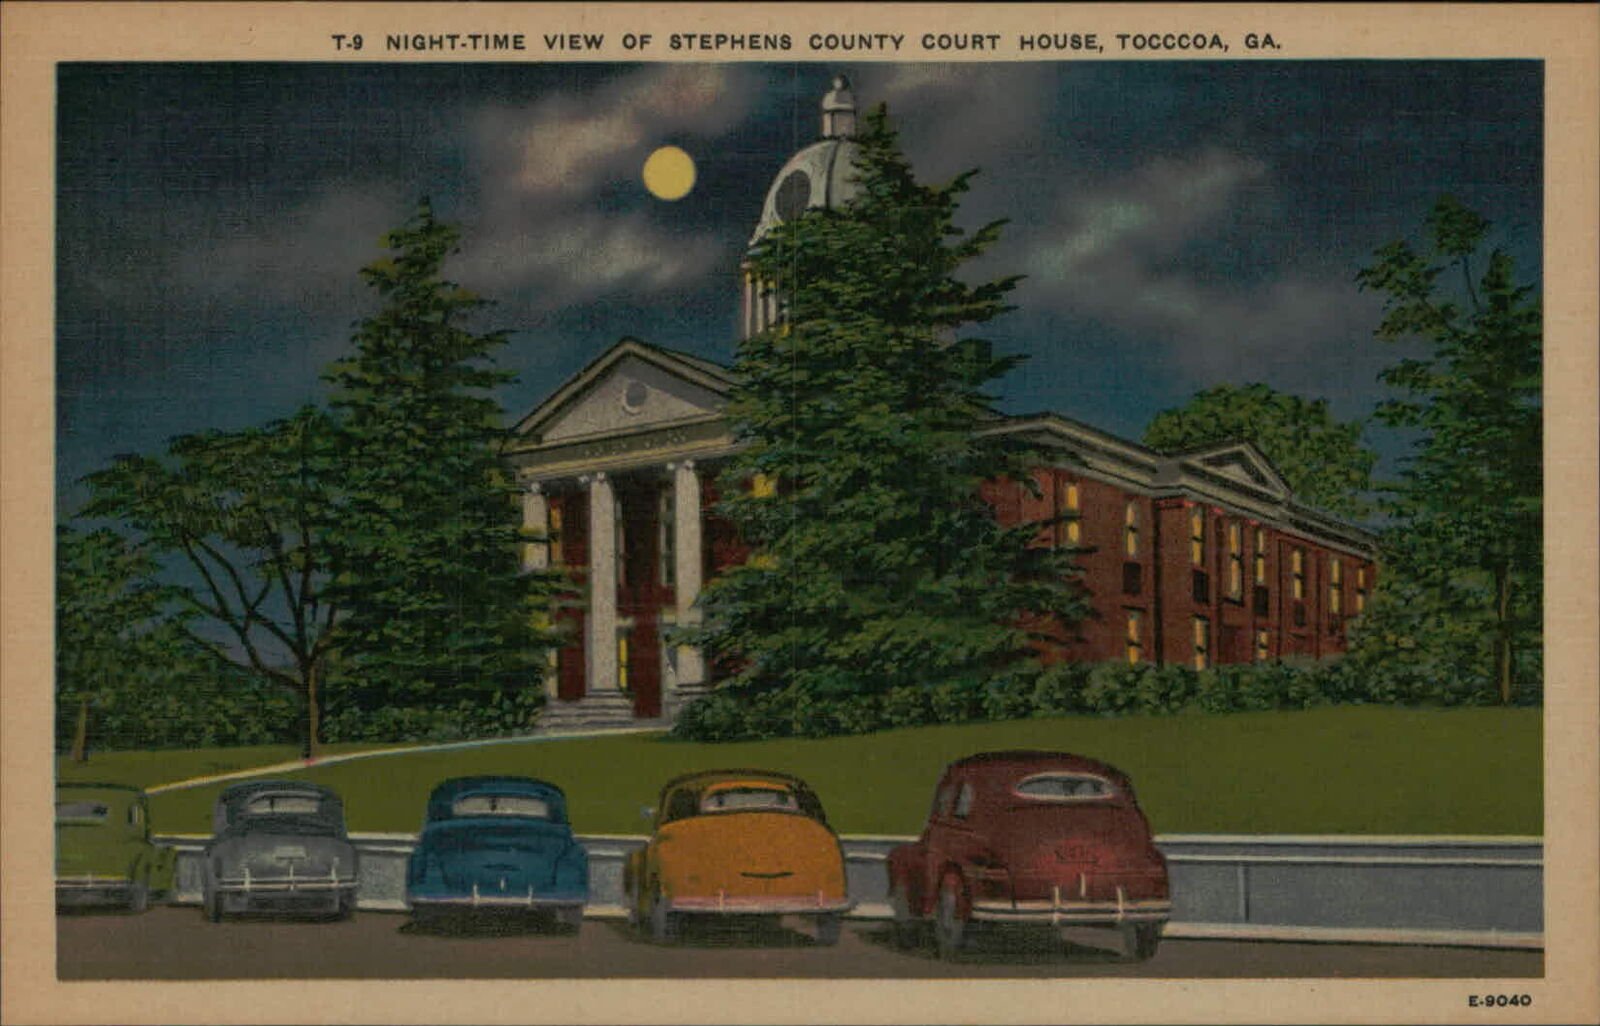 Postcard: T-9 NIGHT-TIME VIEW OF STEPHENS COUNTY COURT HOUSE, TOCCCOA,